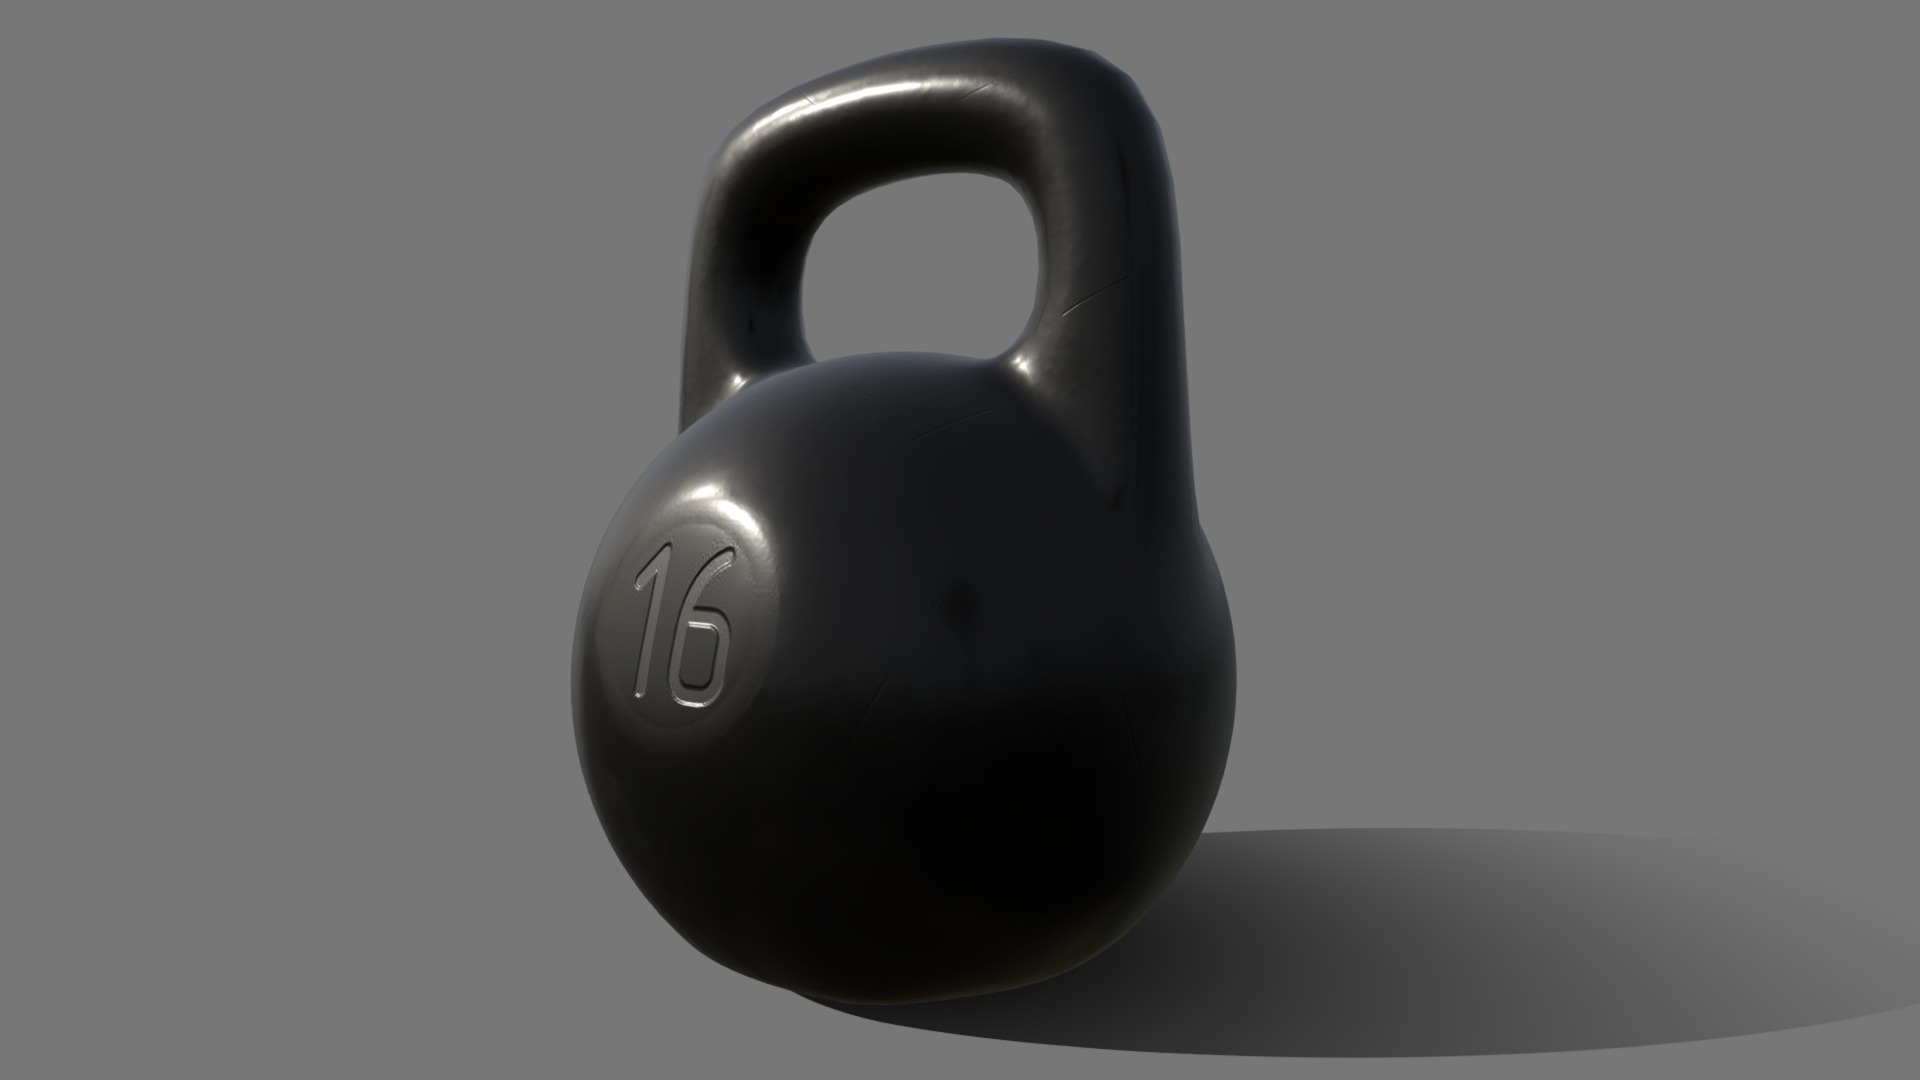 3D model USSR Kettlebell - This is a 3D model of the USSR Kettlebell. The 3D model is about a black teapot on a white surface.